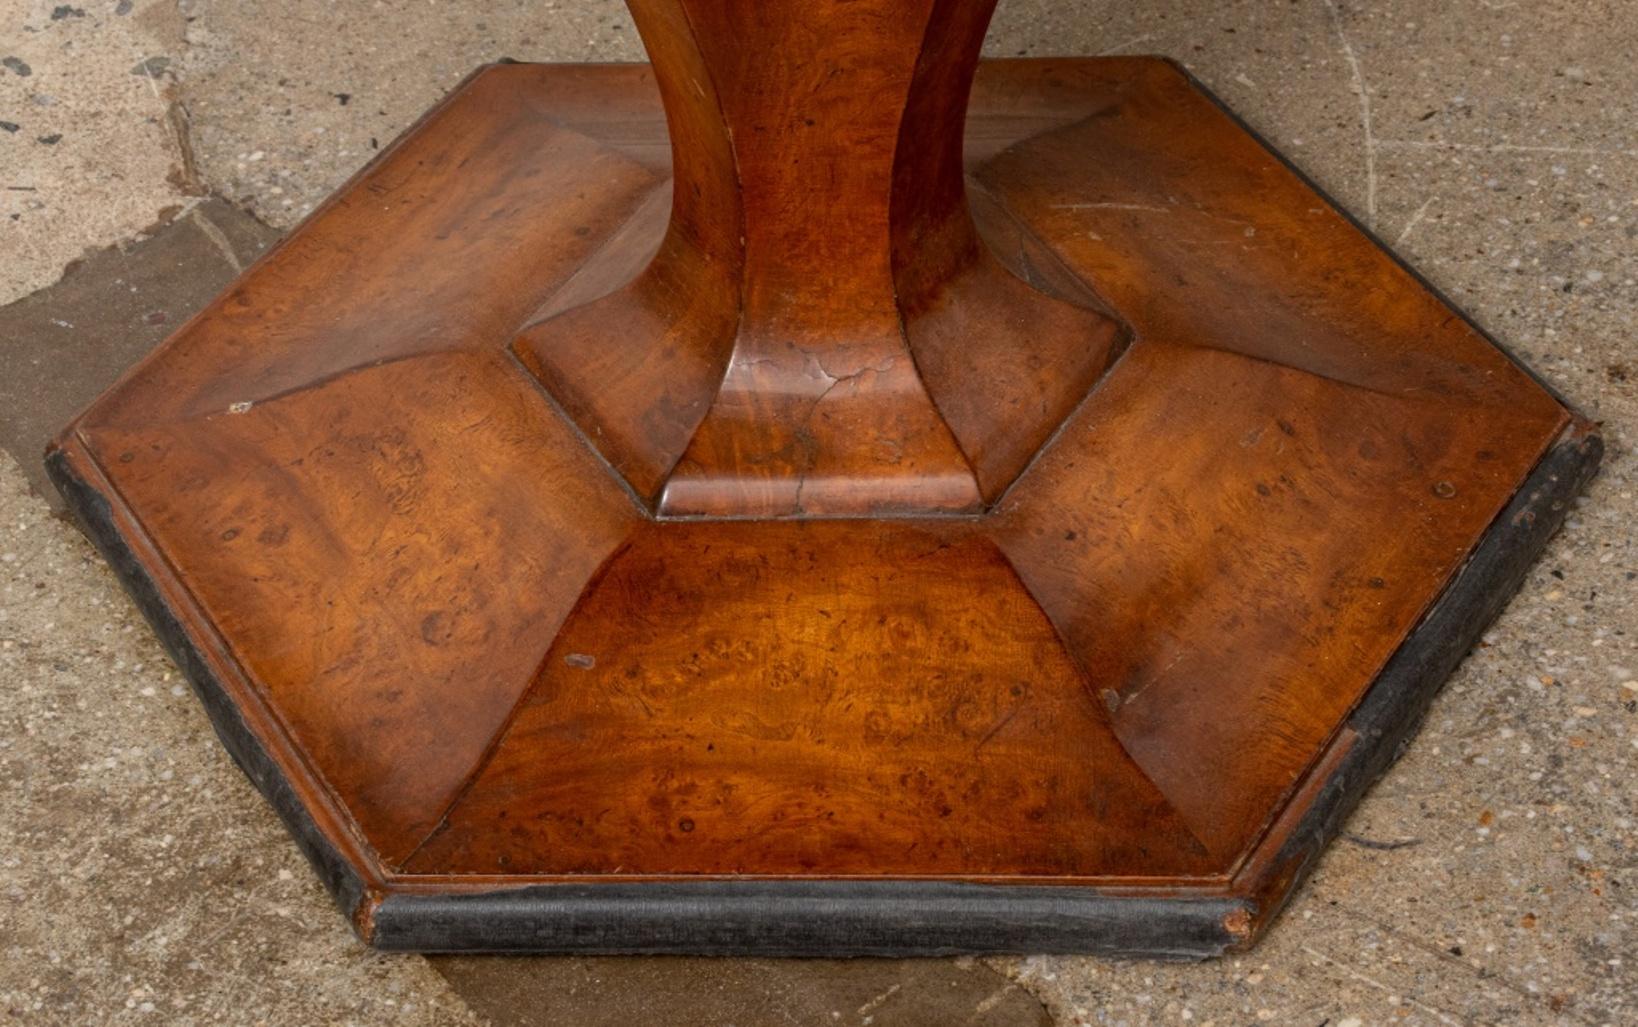 Smith and Watson round table with burlwood veneer and upon hexagonal base with maker's plaque to underside.

Dimensions: 26